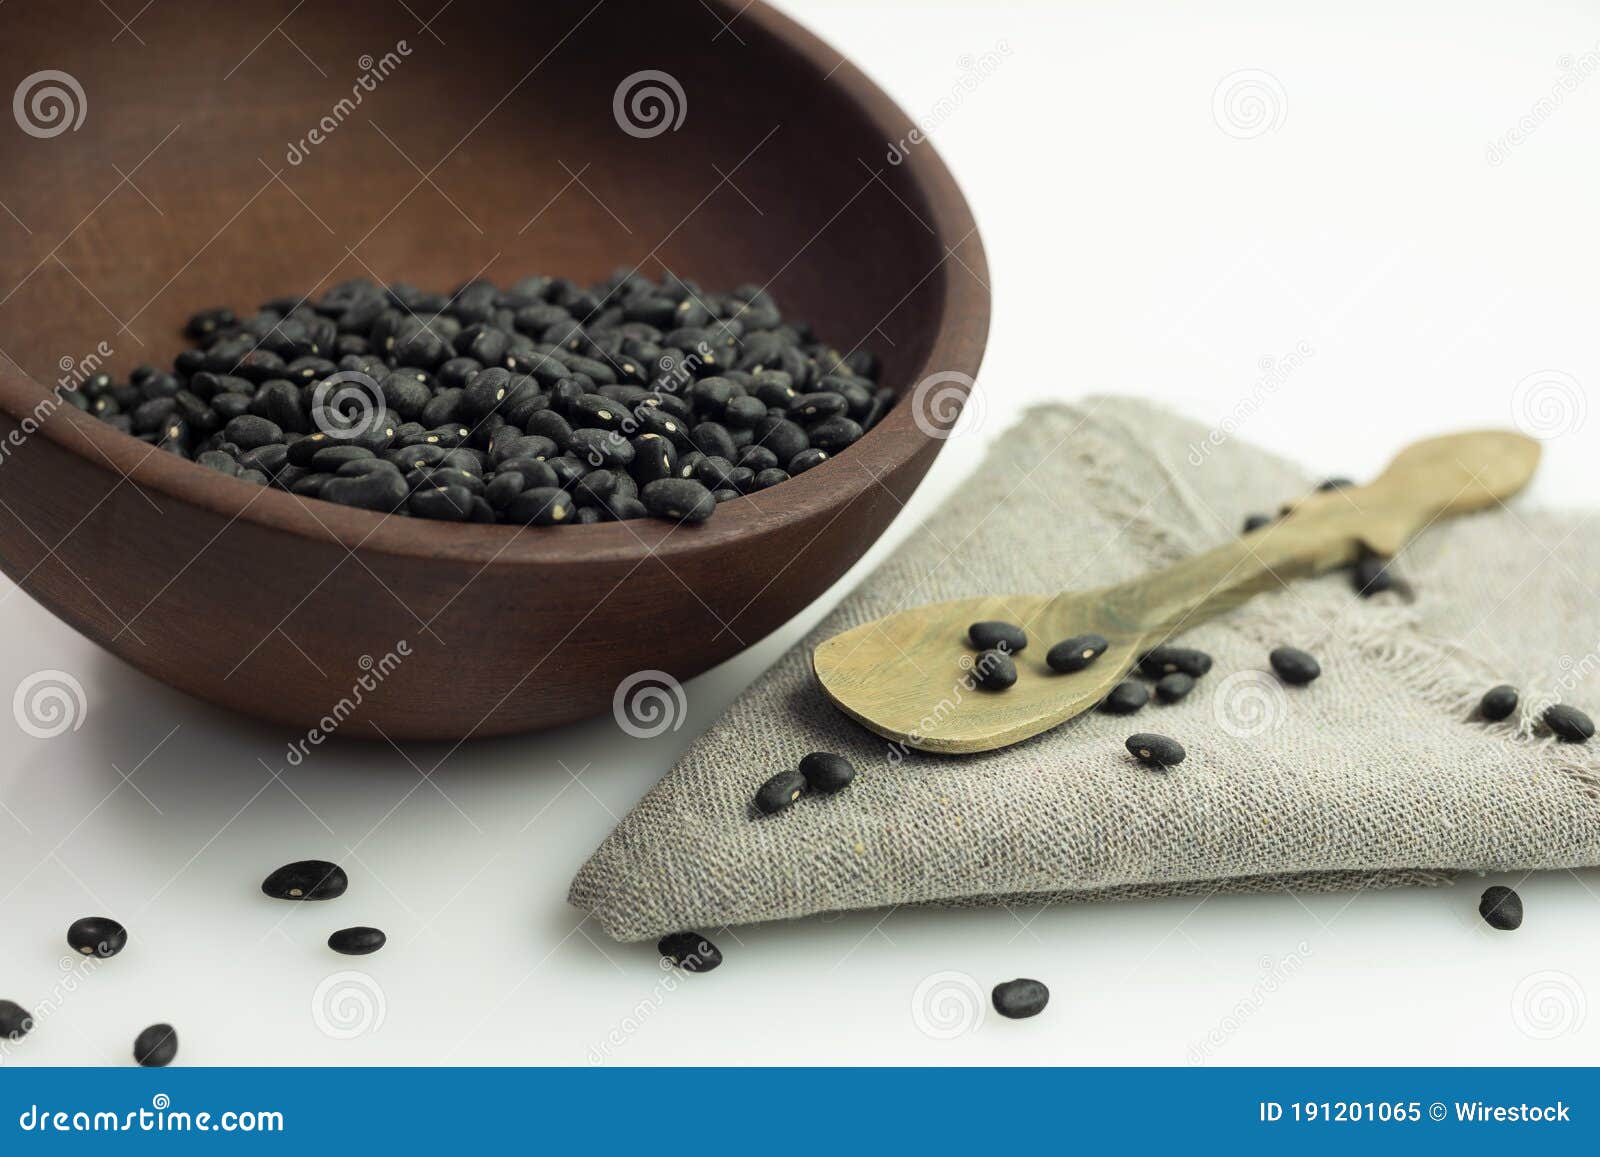 black beans in wooden bowl